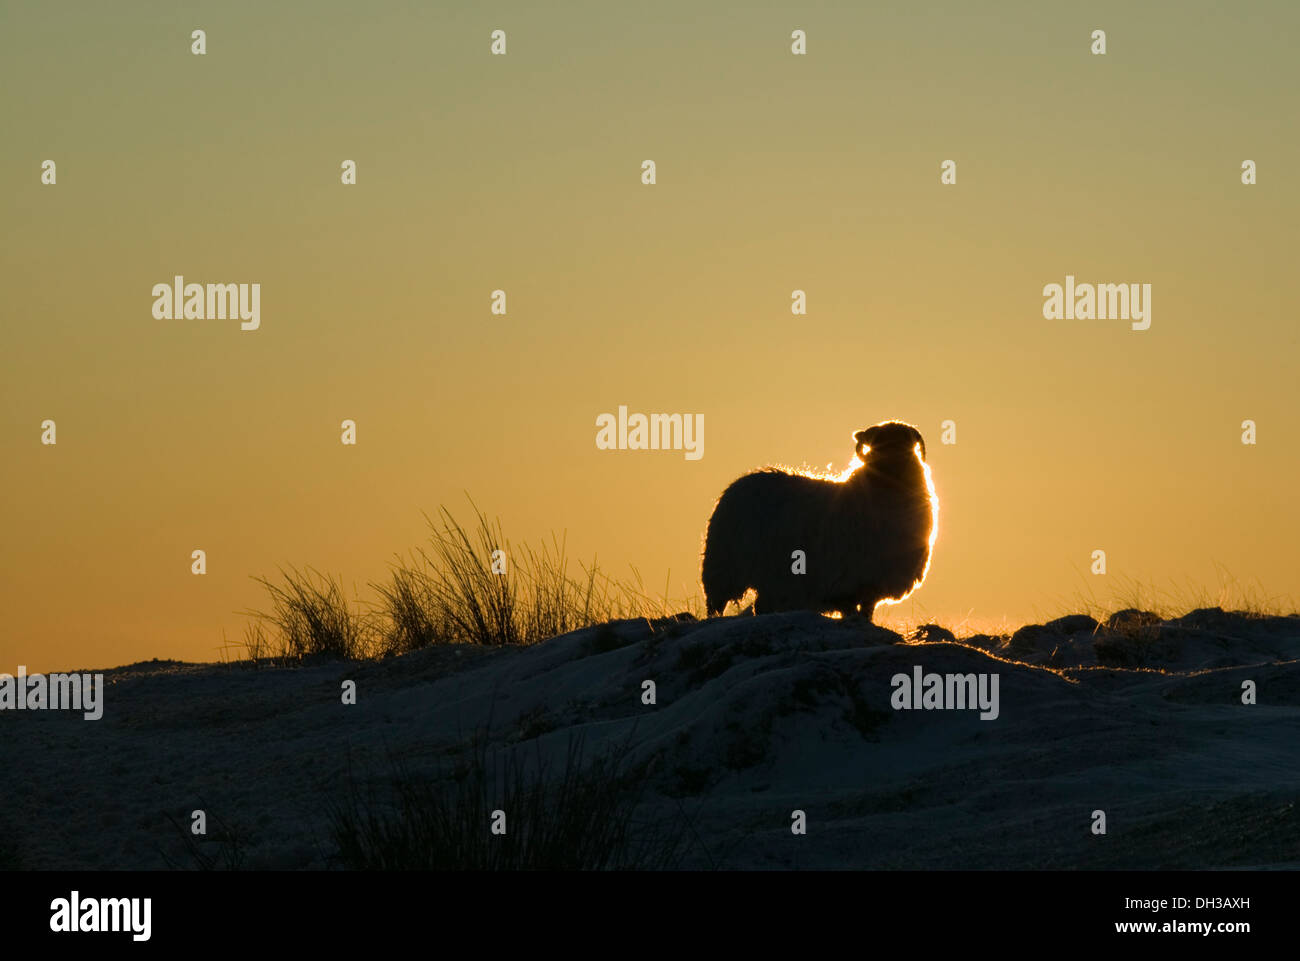 A sheep silhouetted by the setting sun, in snowy conditions near Postbridge, Dartmoor National Park, Devon, Great Britain. Stock Photo